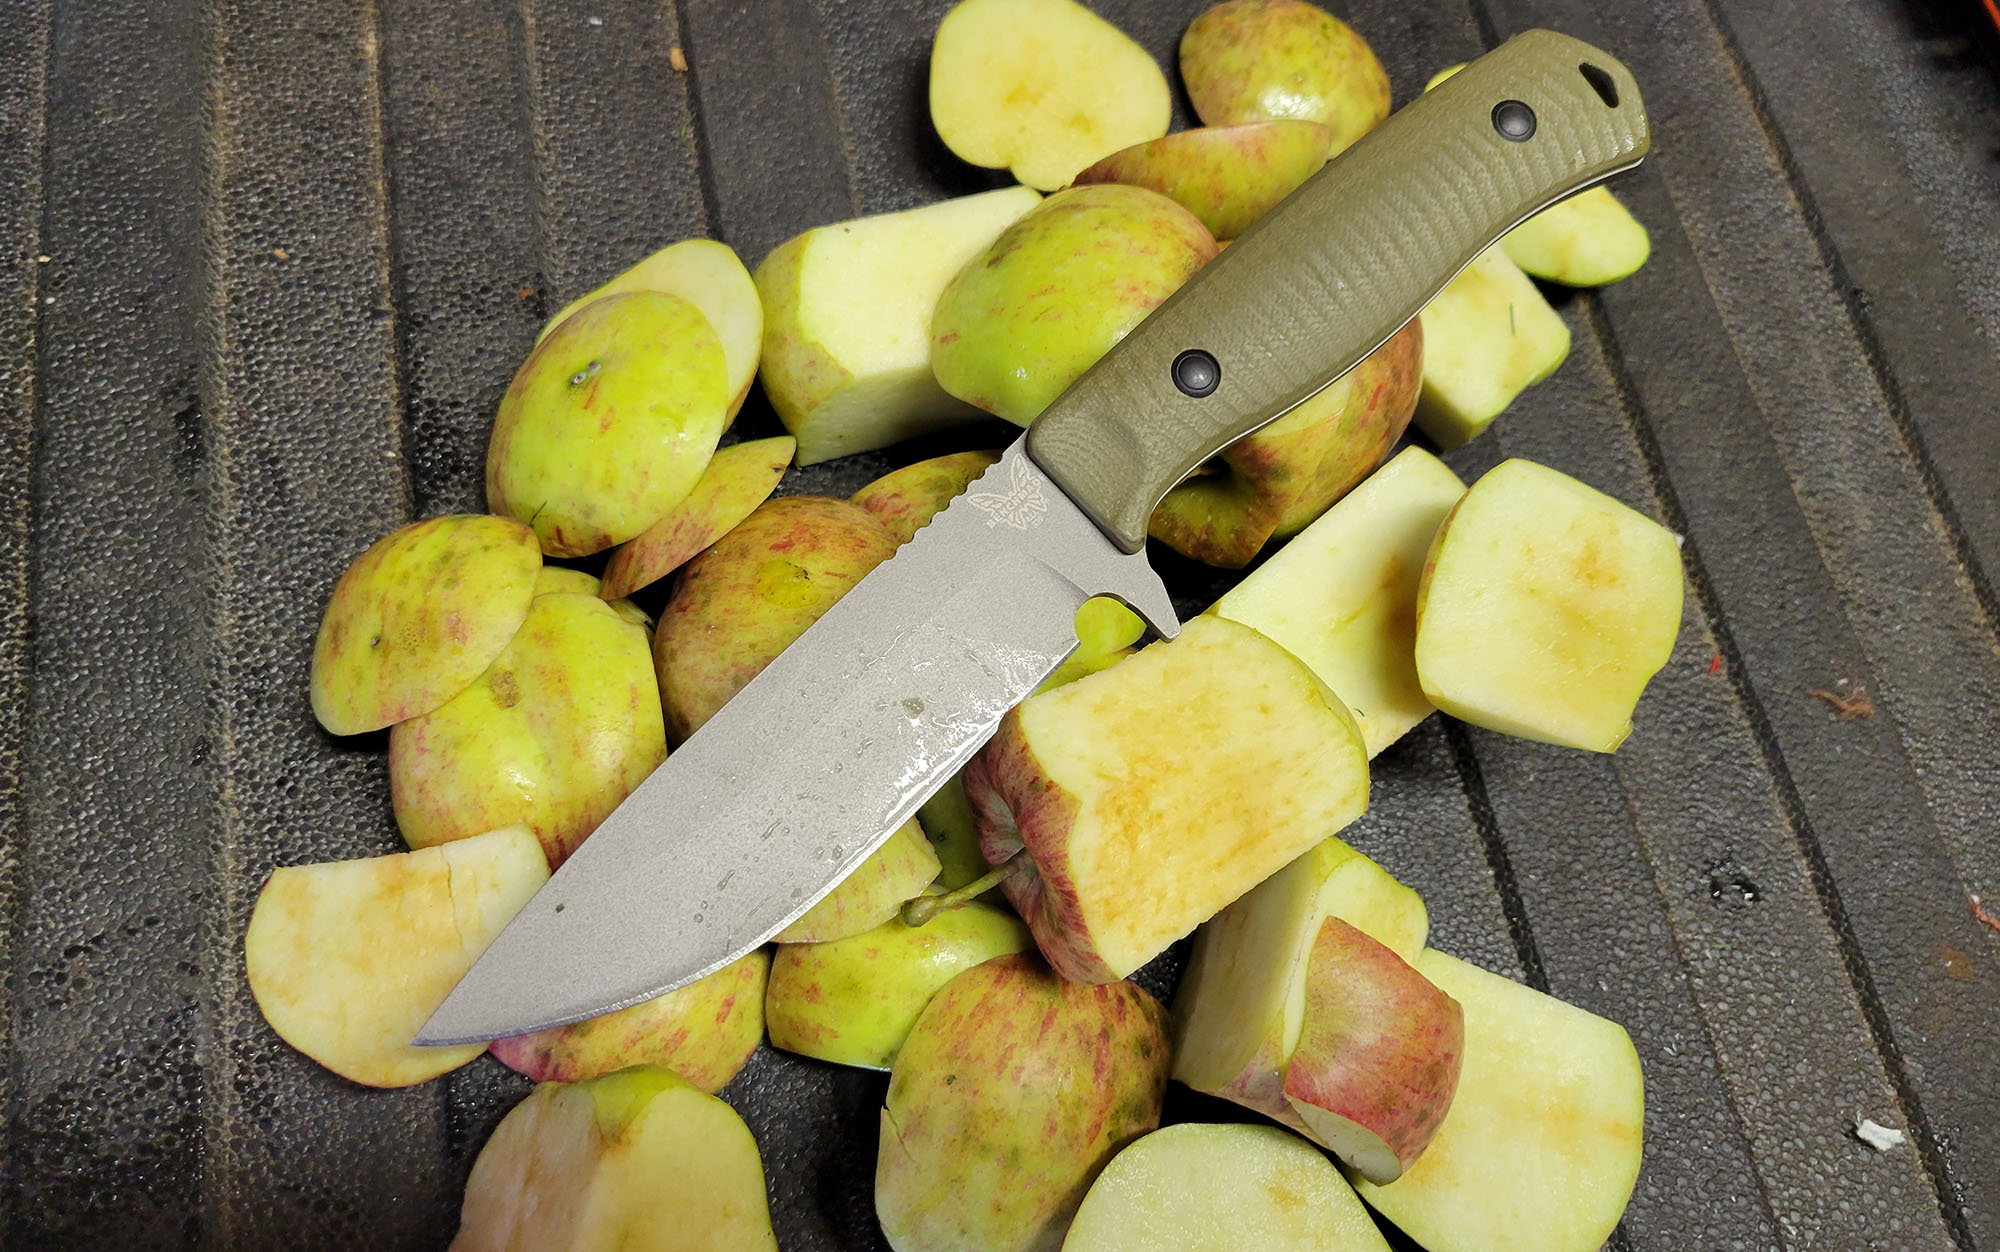 We cut apples with the Benchmade.